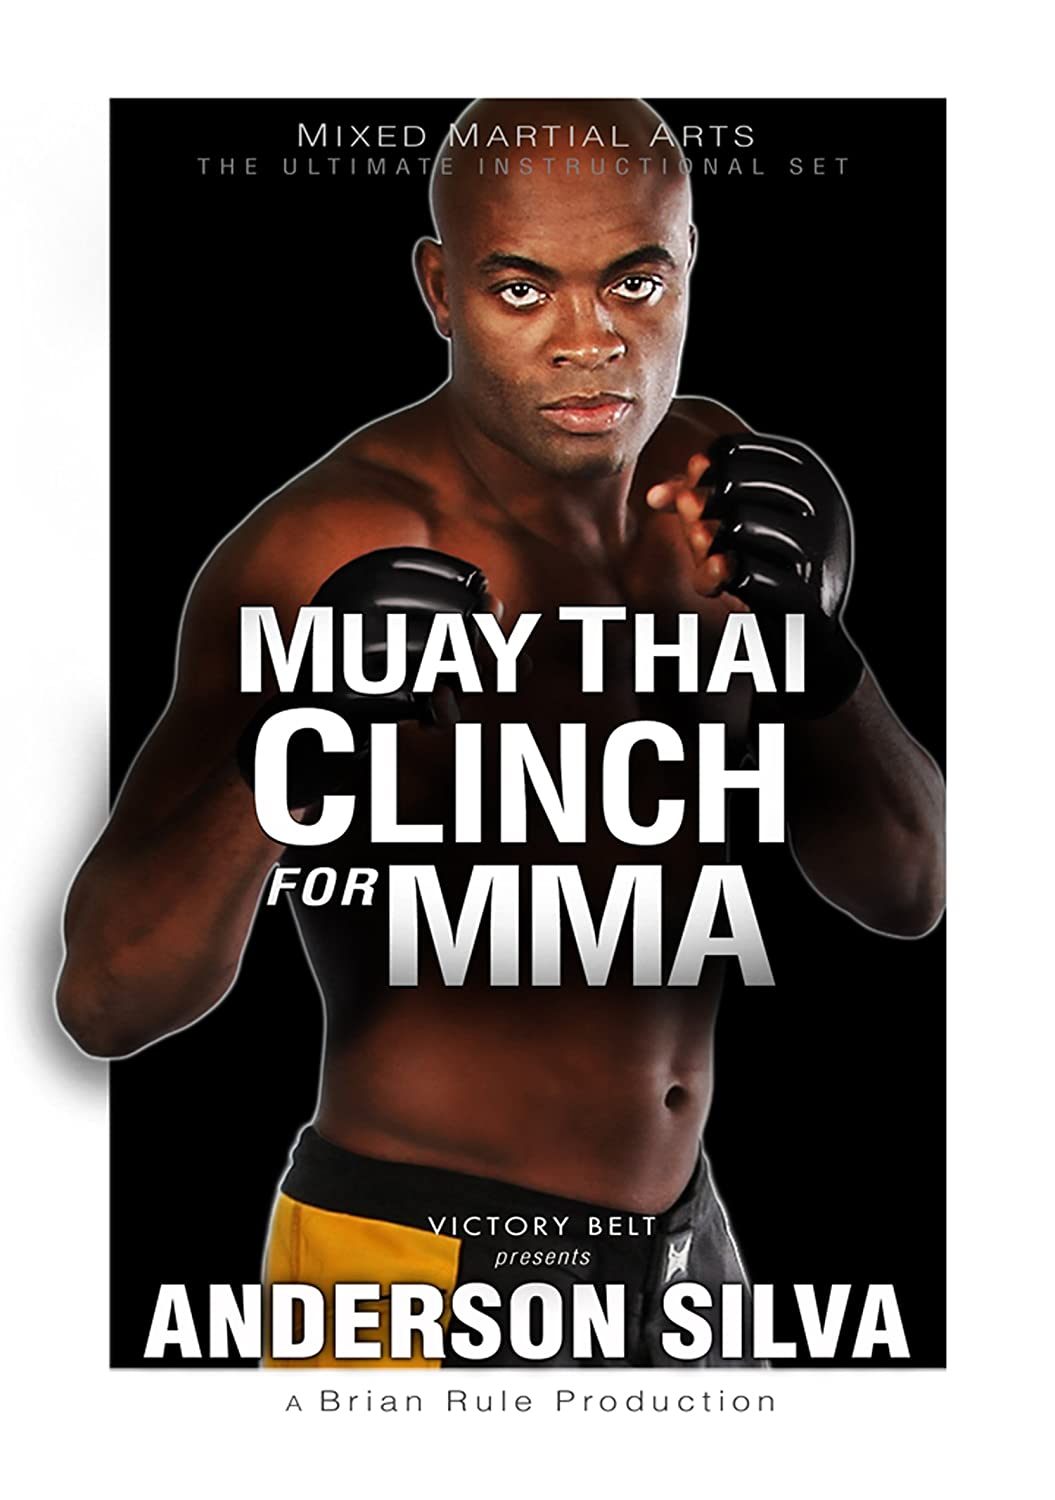 Muay Thai Clinch for MMA DVD with Anderson Silva (Preowned) - Budovideos